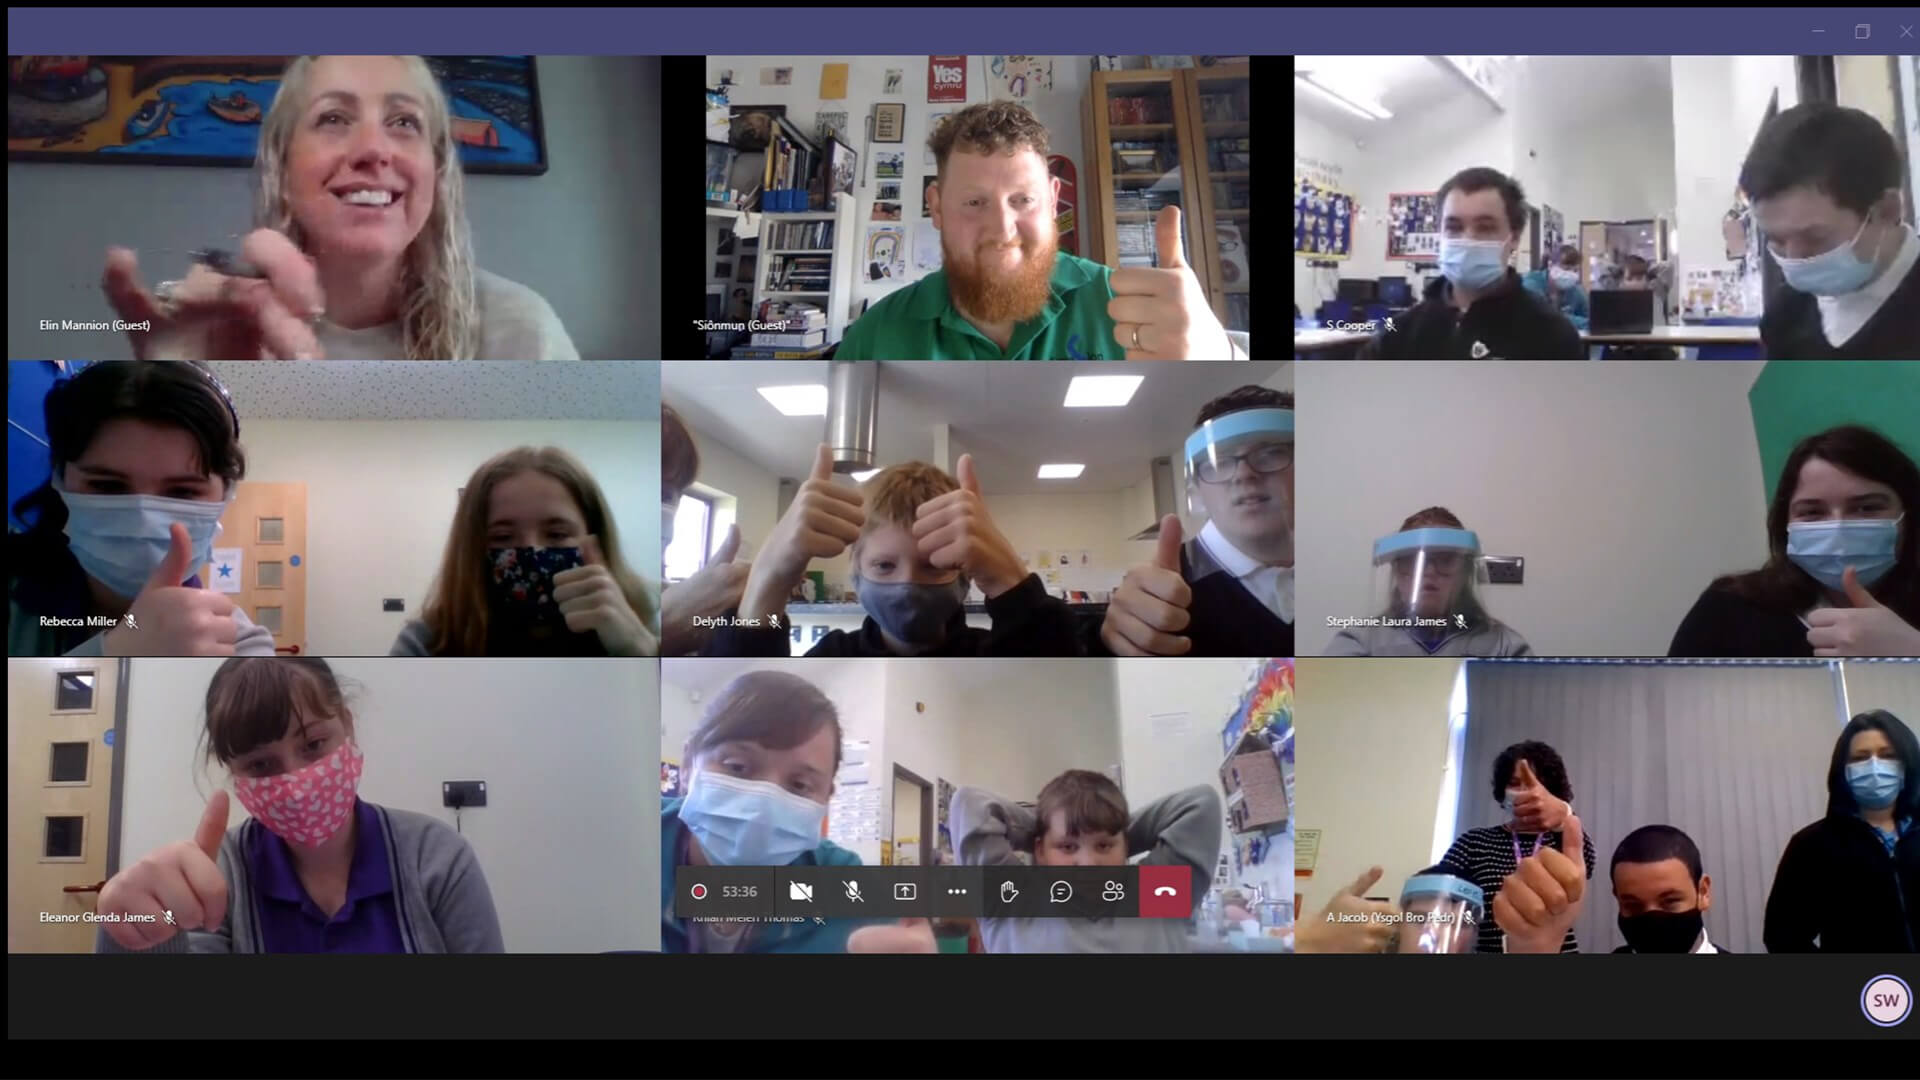 Screenshot of a zoom call with 16 participants. They all have their cameras on. 